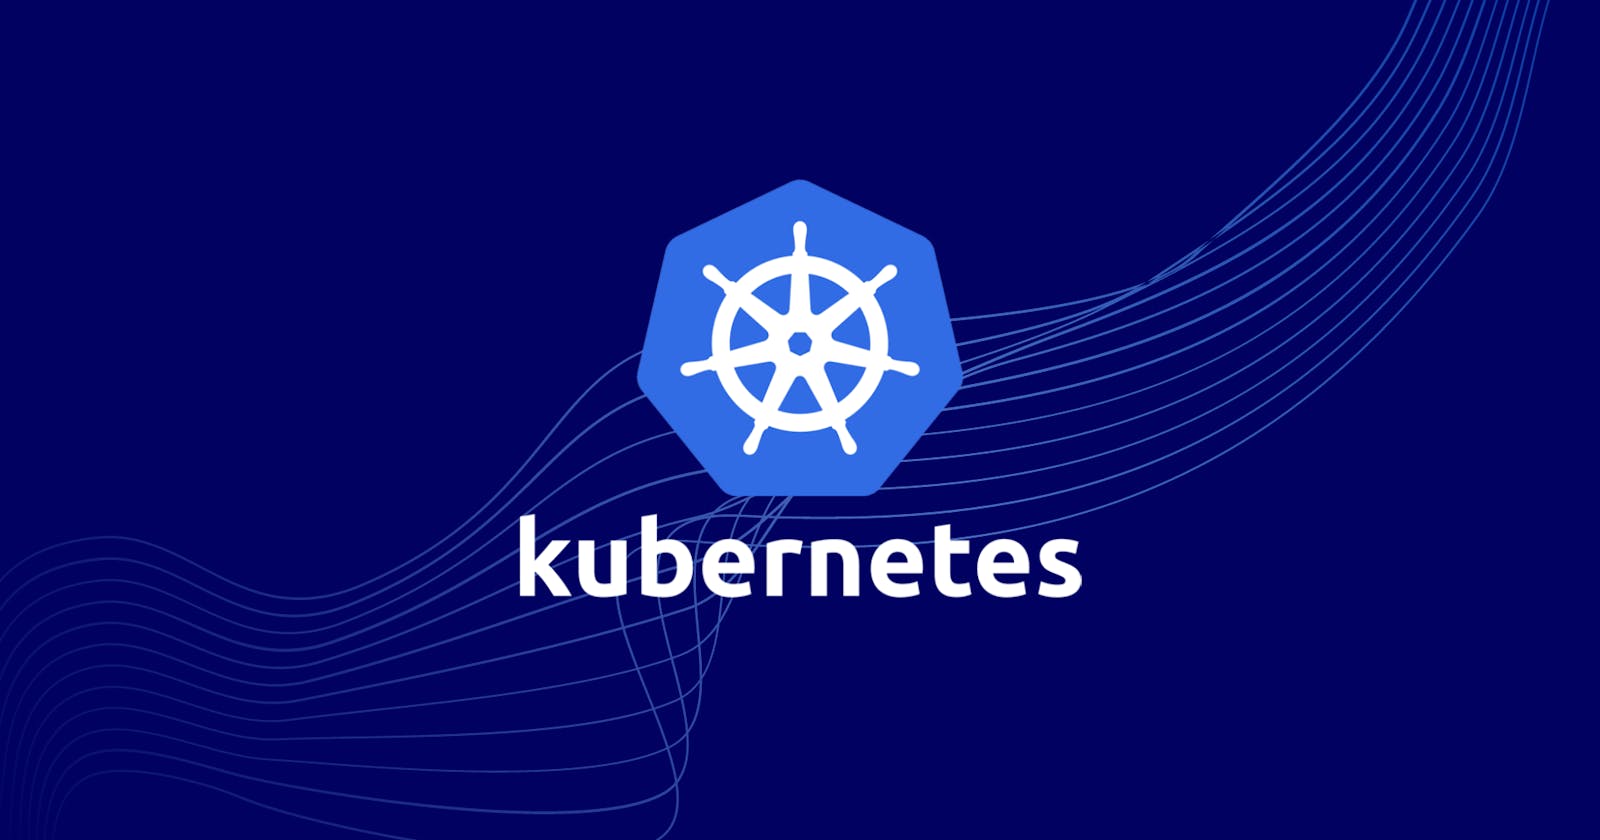 Day 33 Task: Working with Namespaces and Services in Kubernetes